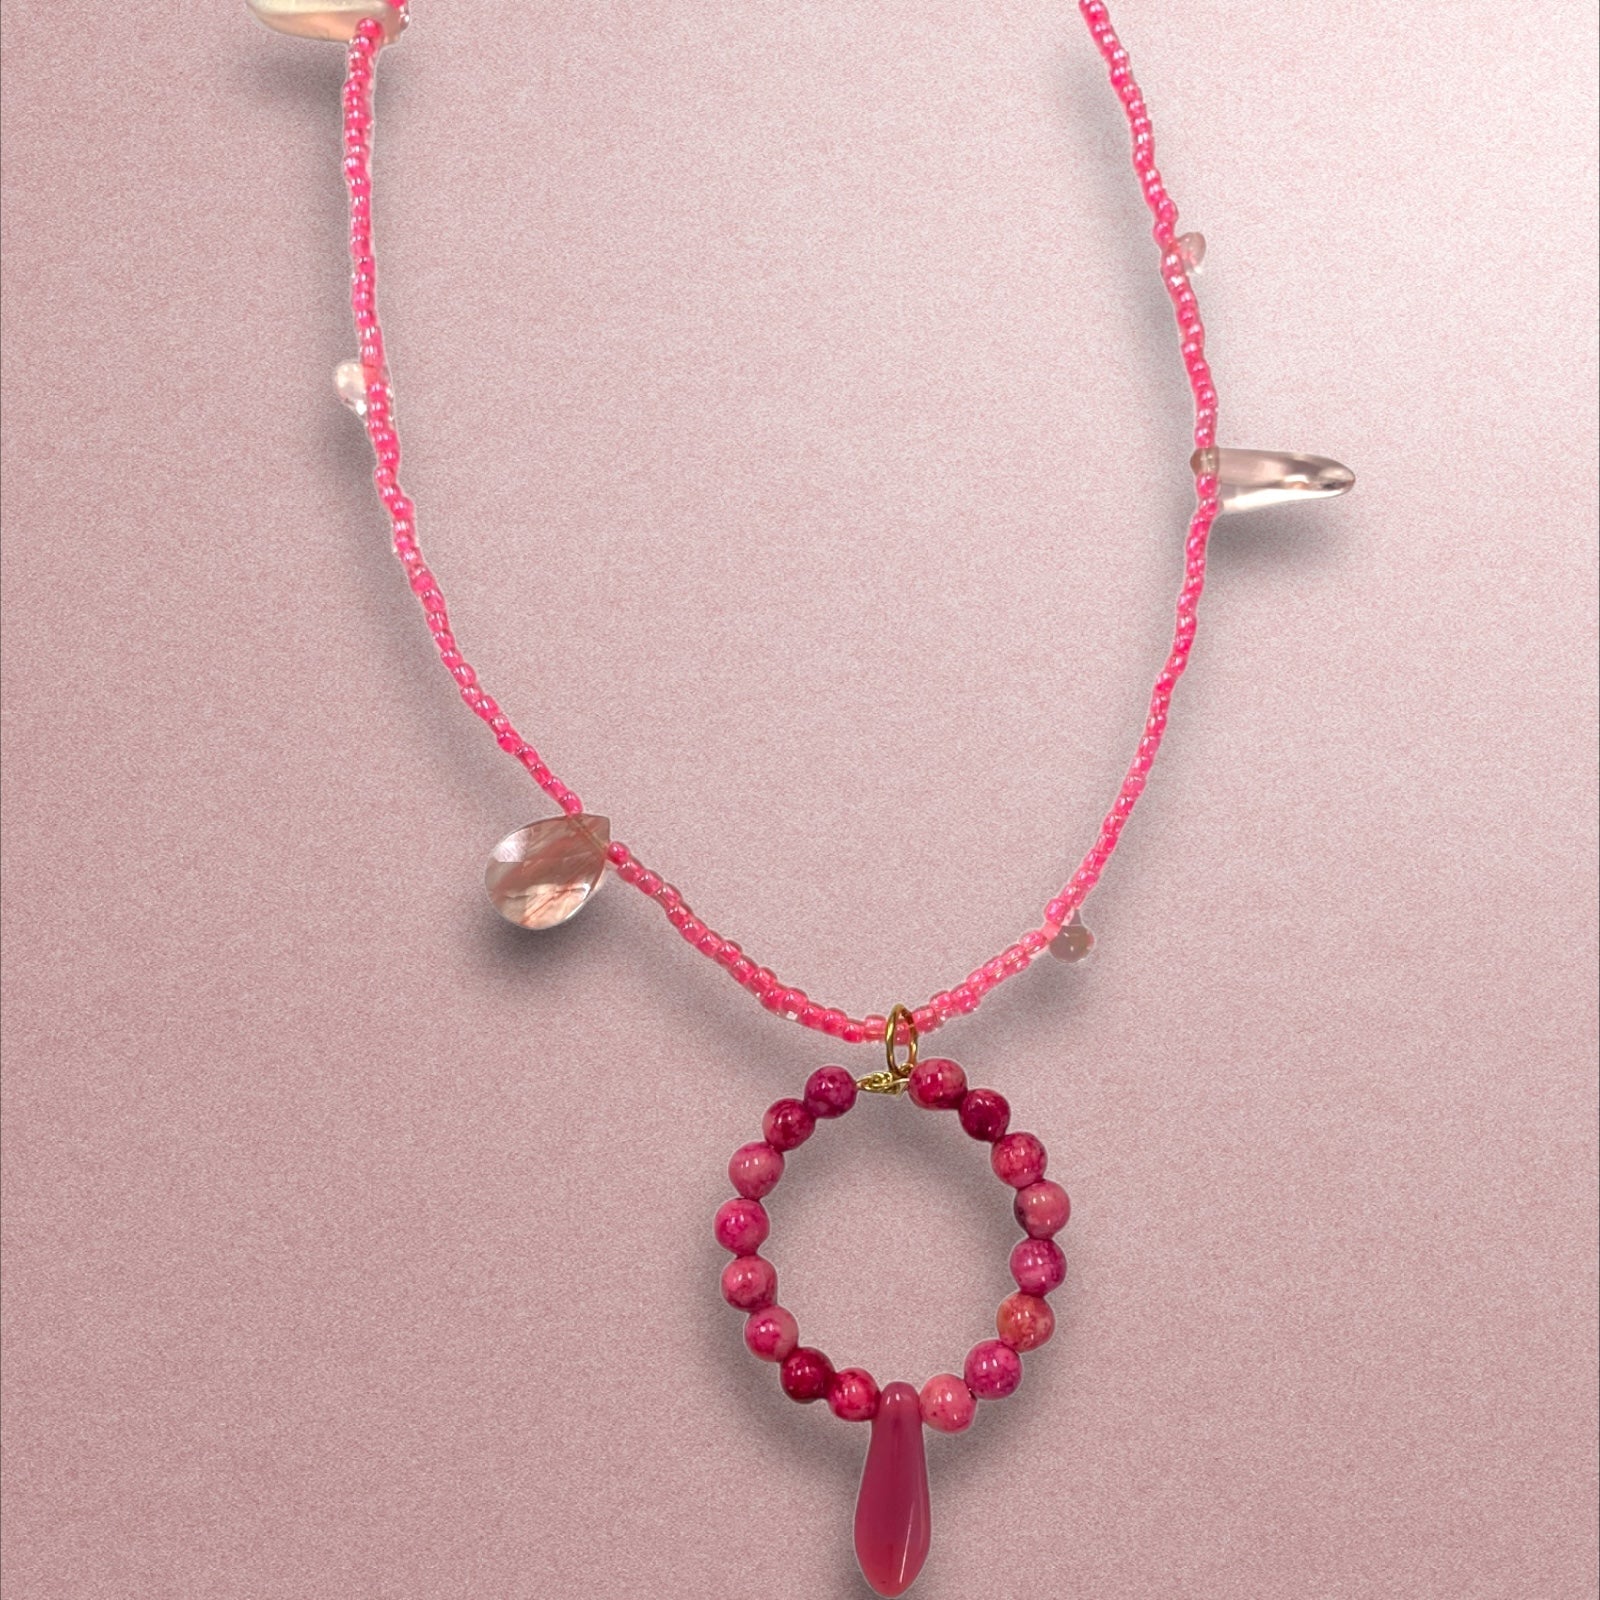 1 of 1 Hand-Beaded Czech Crystal Pink and Gold Necklace-